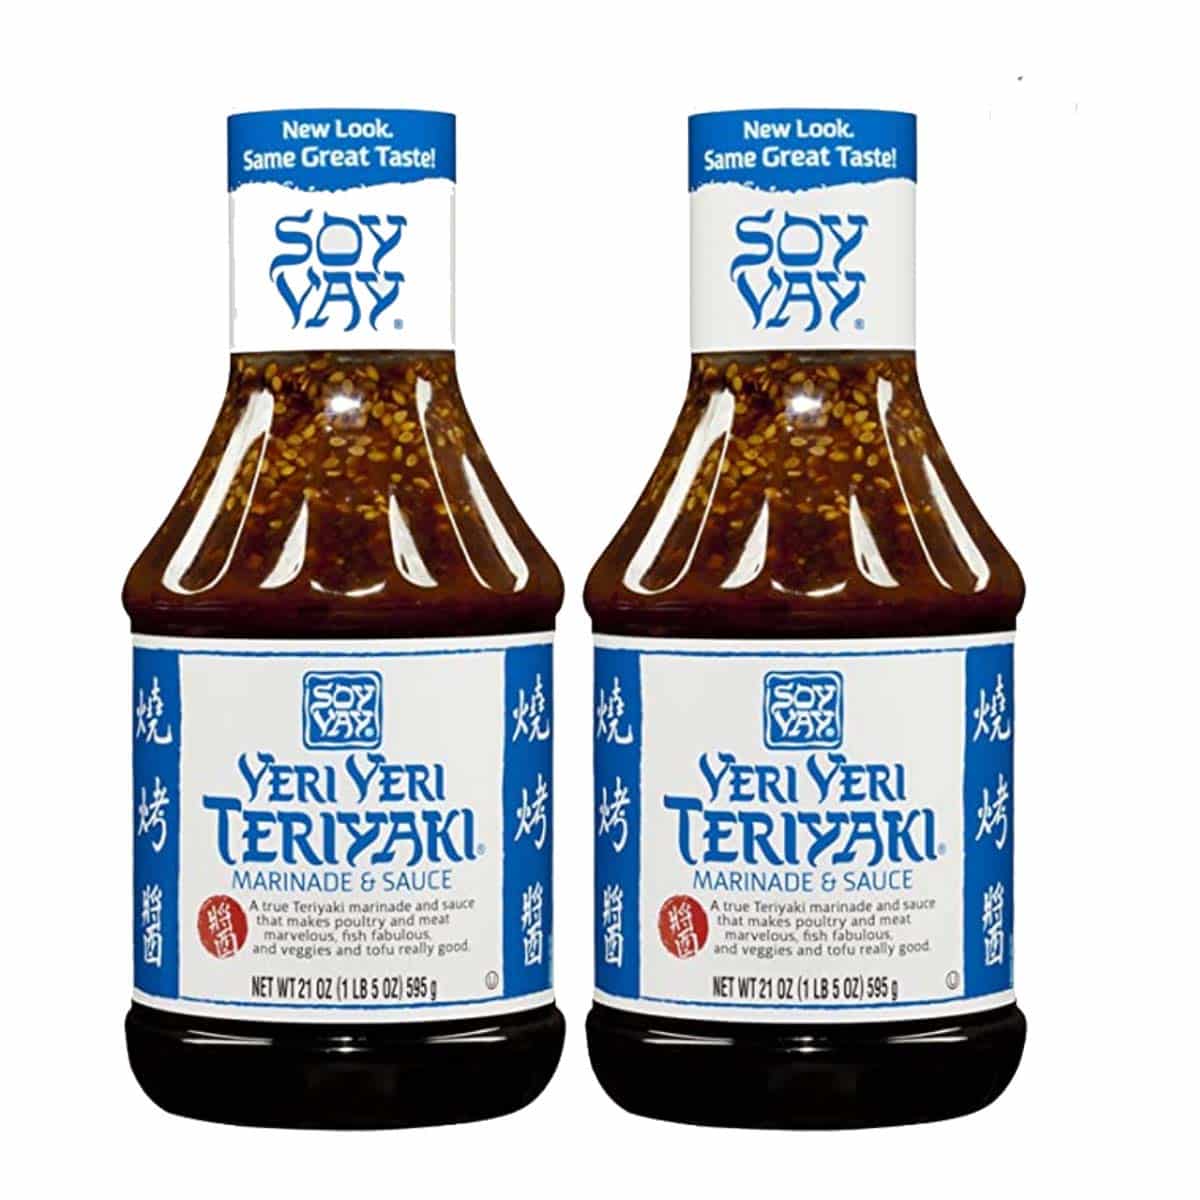 The closest in flavor to bulgogi sauce, teriyaki sauce is a great substitute. It's sweet and savory, with a hint of sourness, and it goes great with beef.